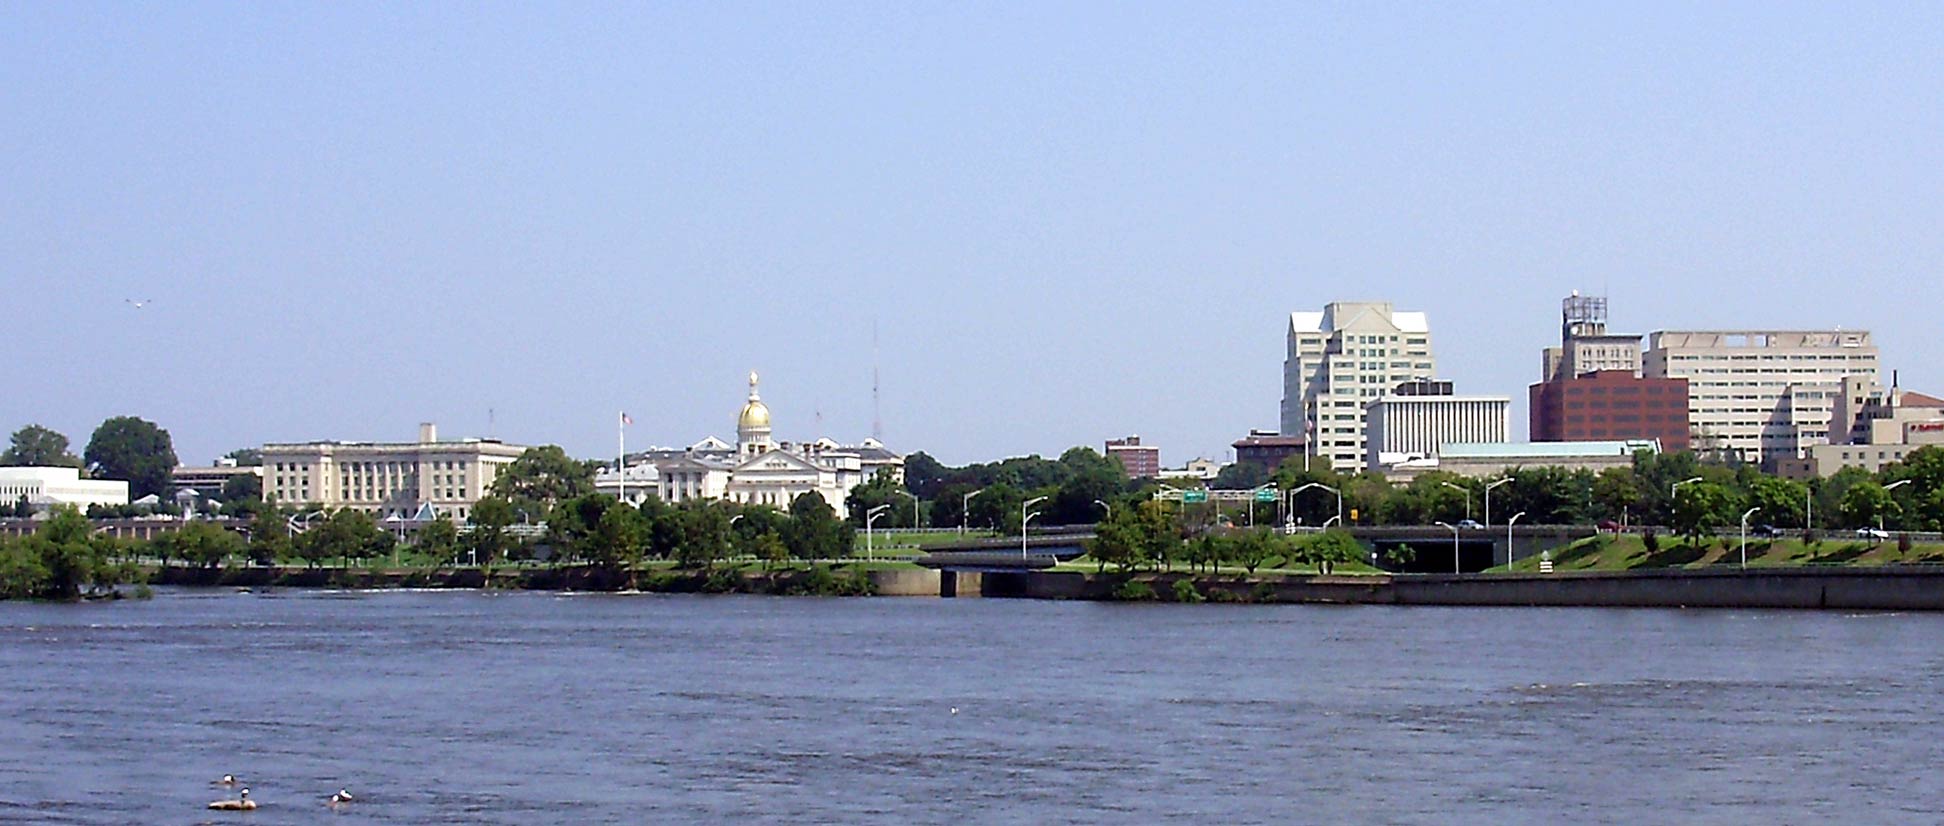 View of downtown Trenton, New Jersey and the mouth of the Assunpink Creek from across the Delaware River